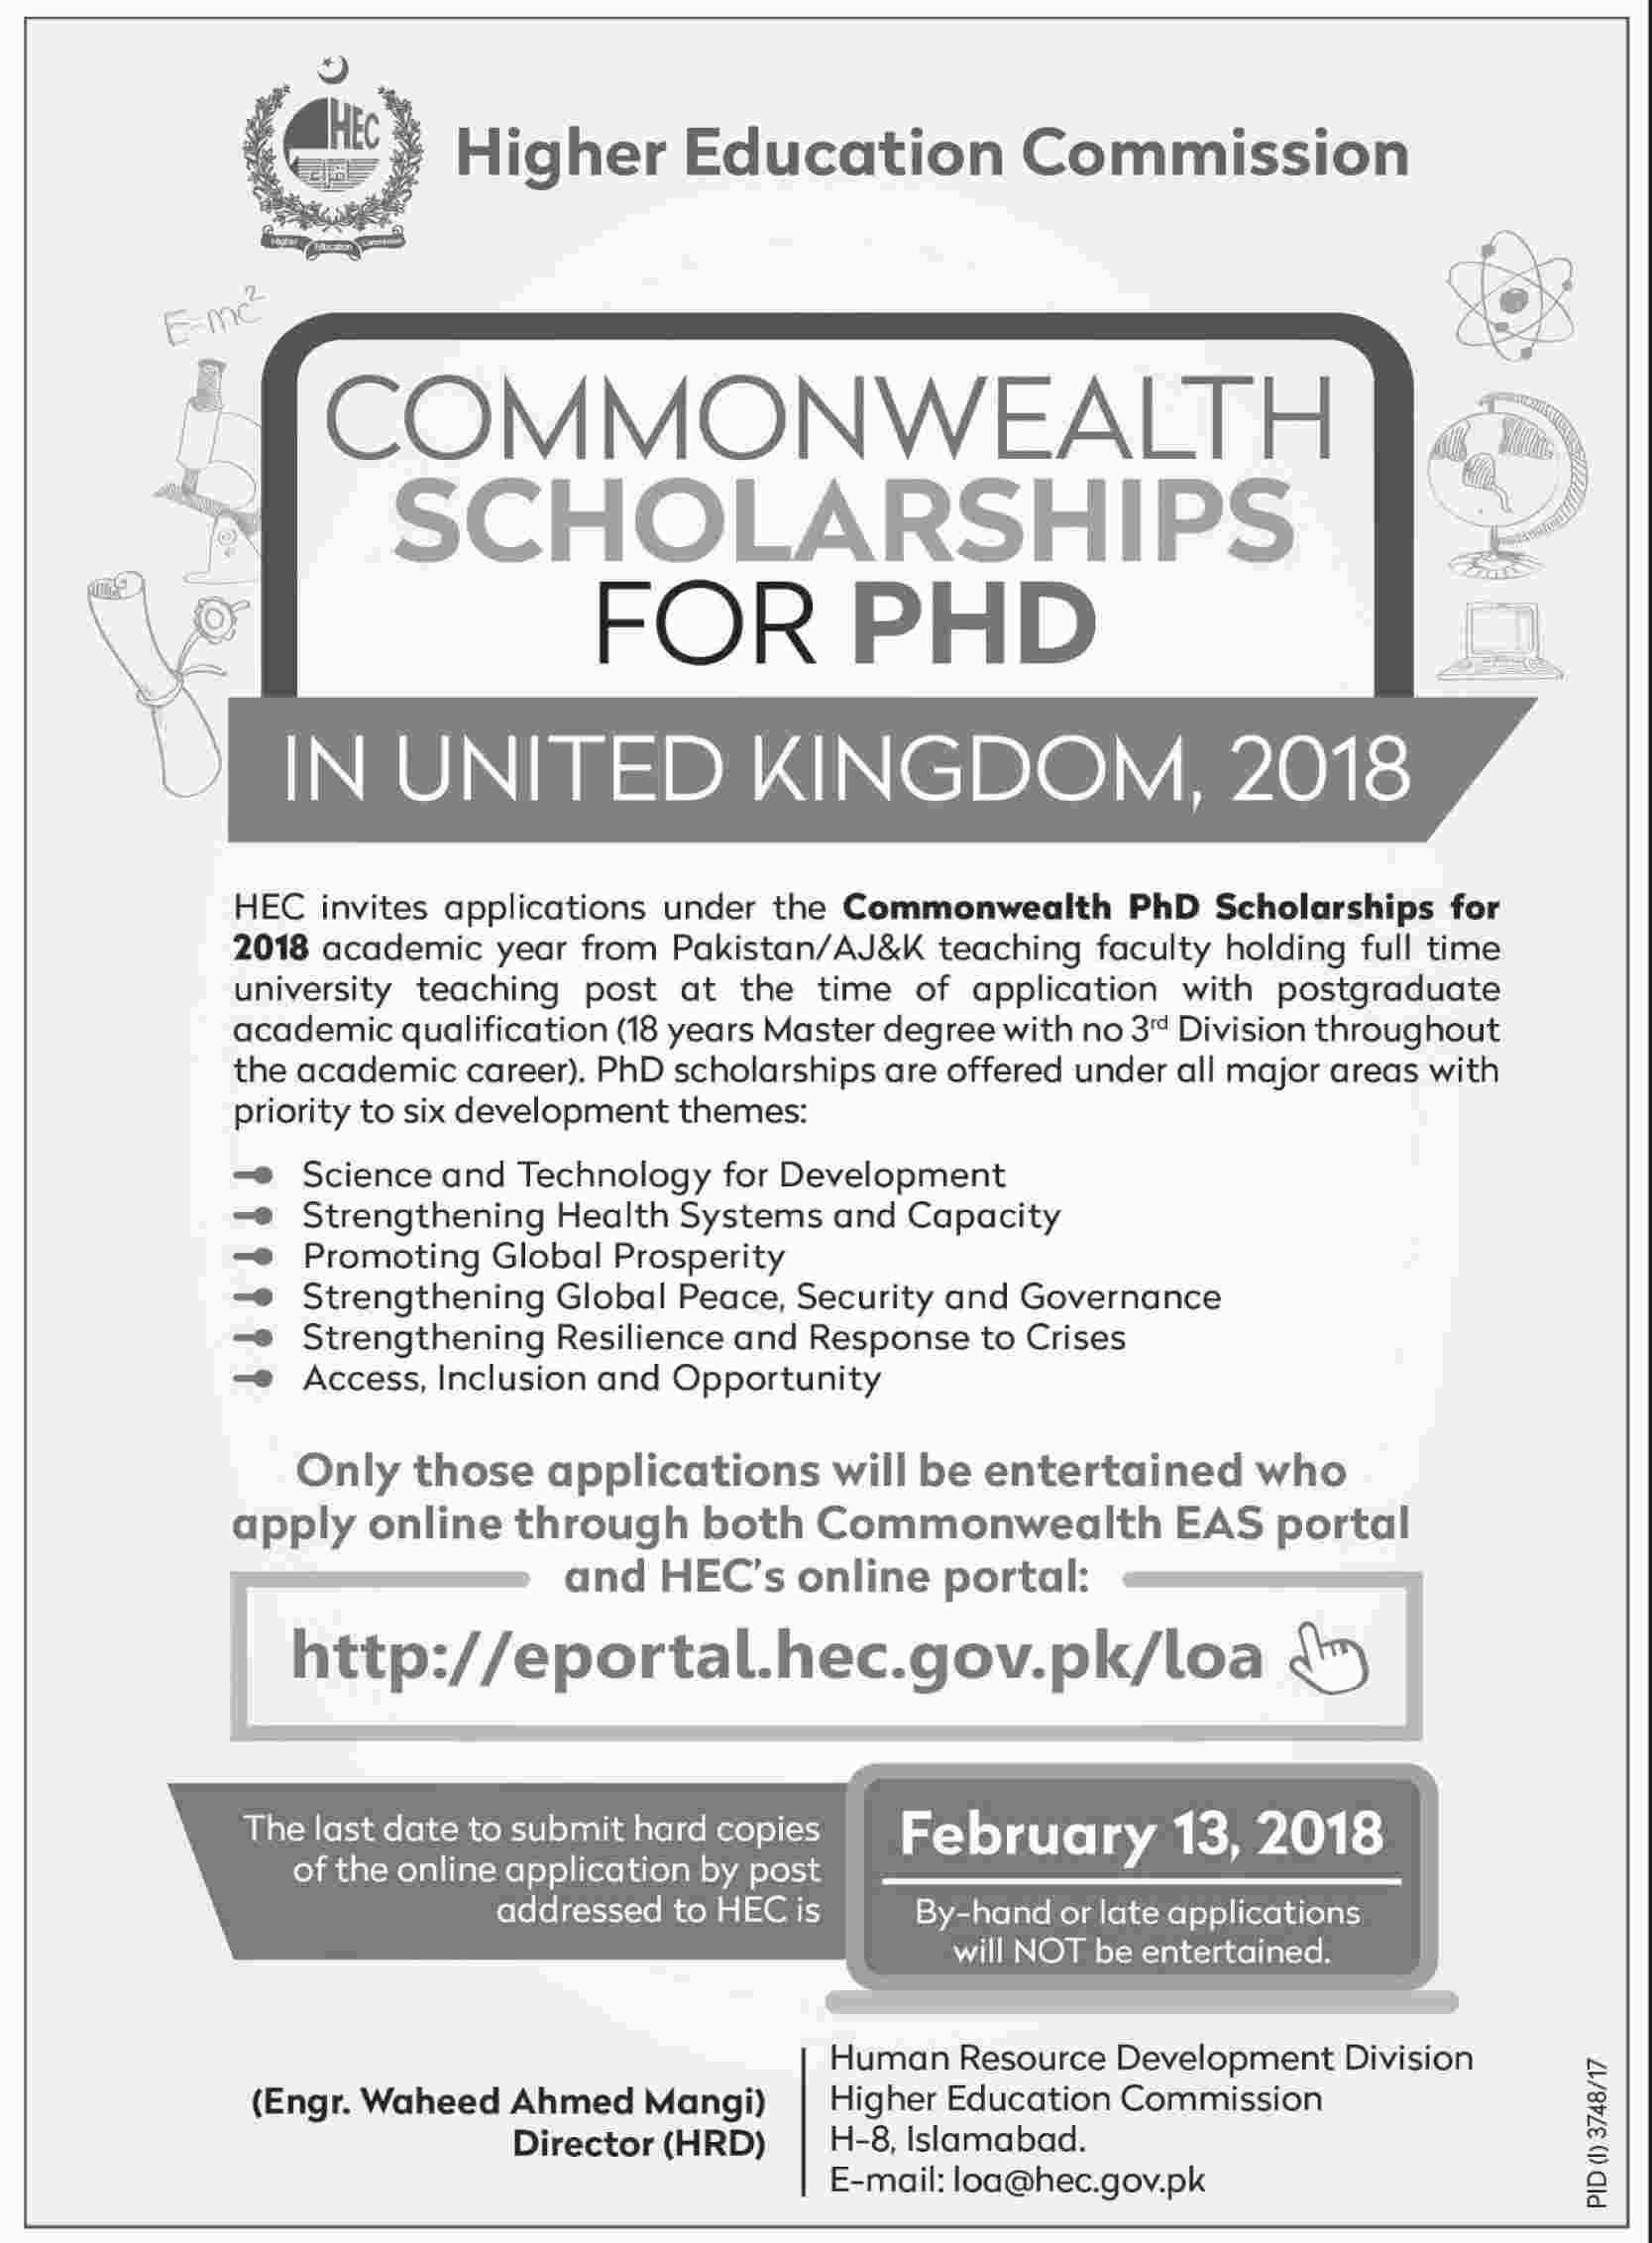 Commonwealth Scholarships for PhD in United Kingdom 2018